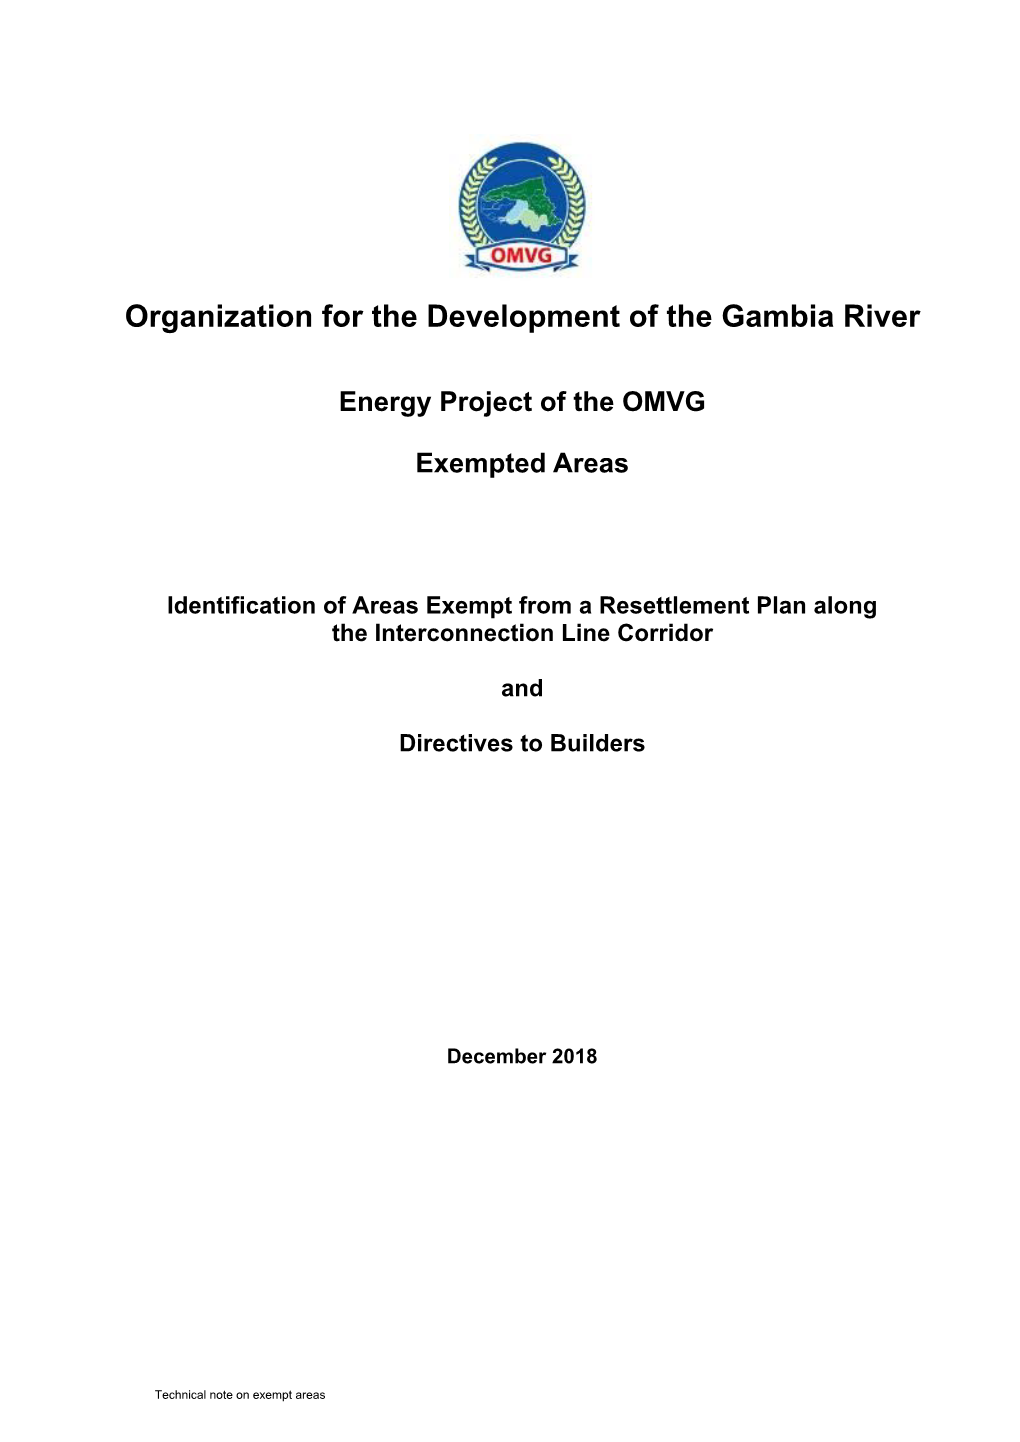 Organization for the Development of the Gambia River